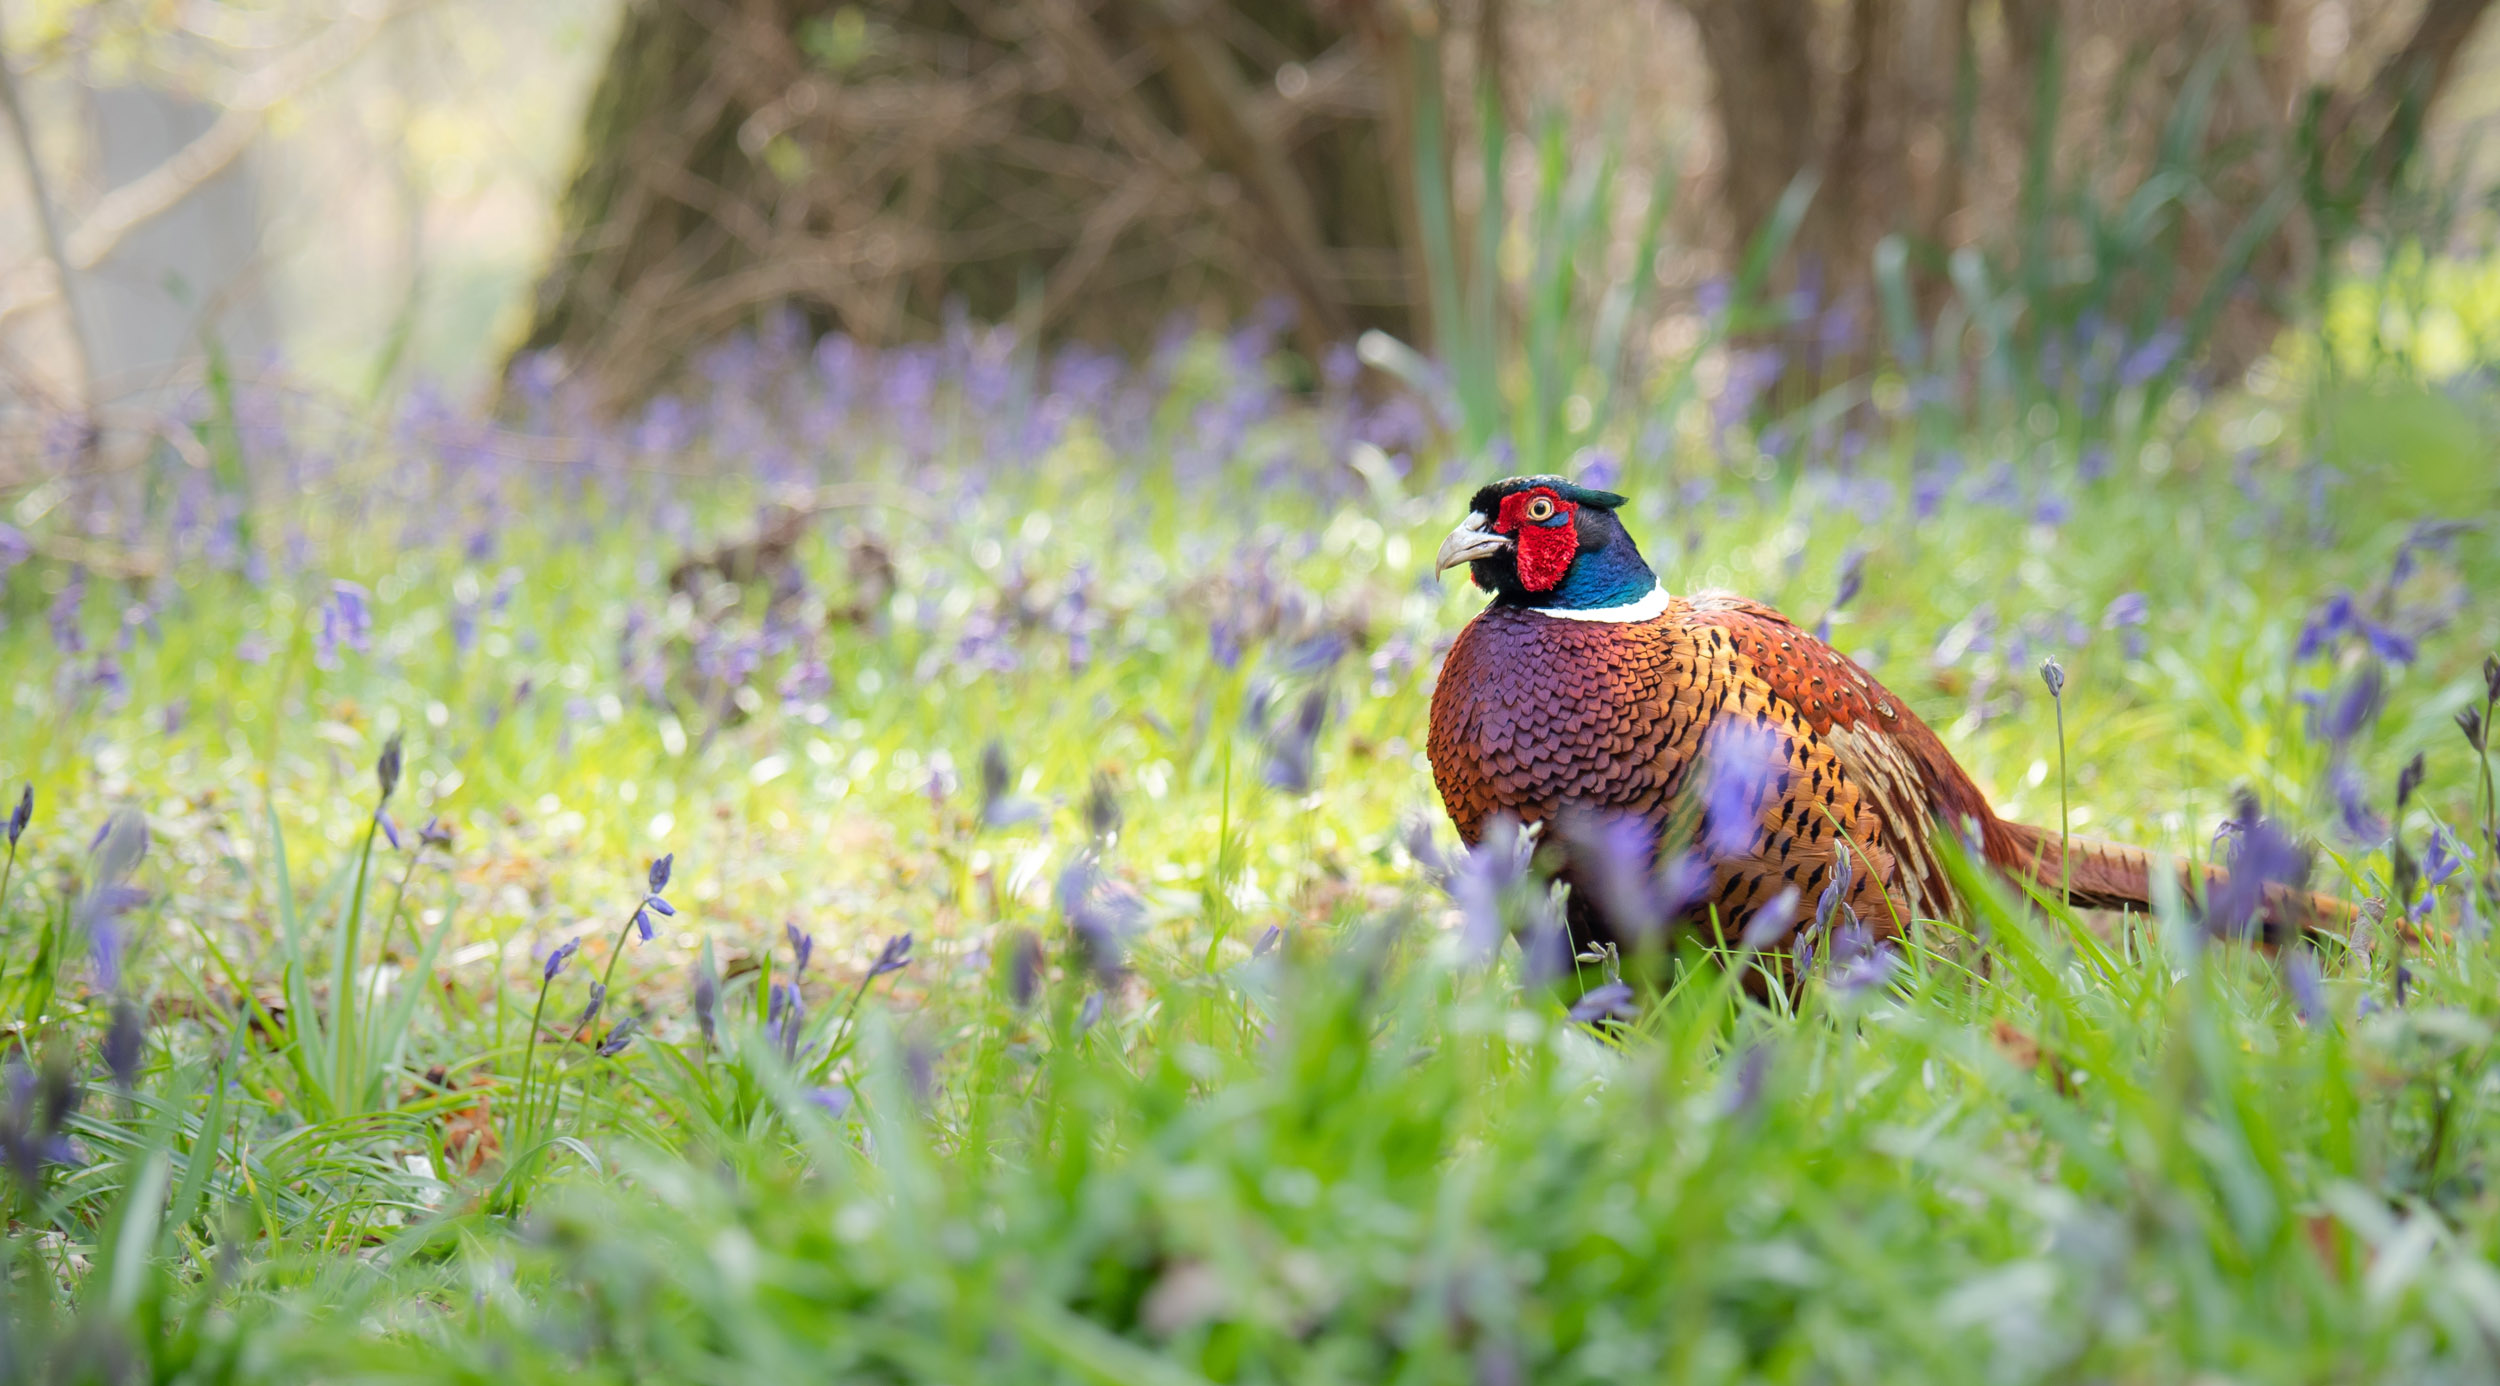 A lone Pheasant walking through a bluebell covered woodland floor.